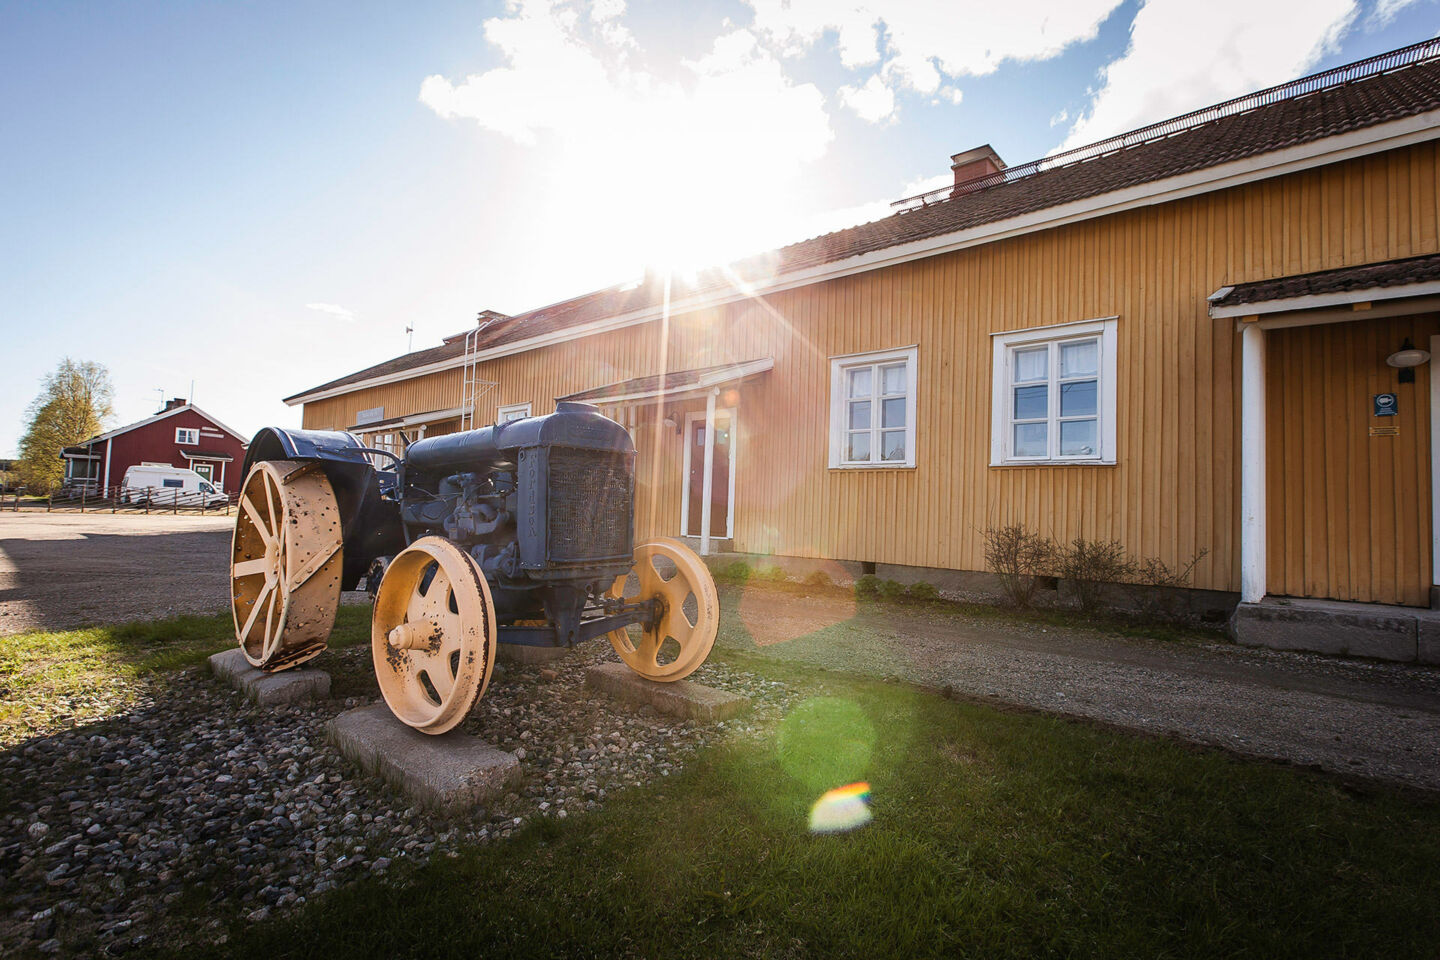 A tractor outside the Salla War Museum in summer, a Finish Lapland filming location